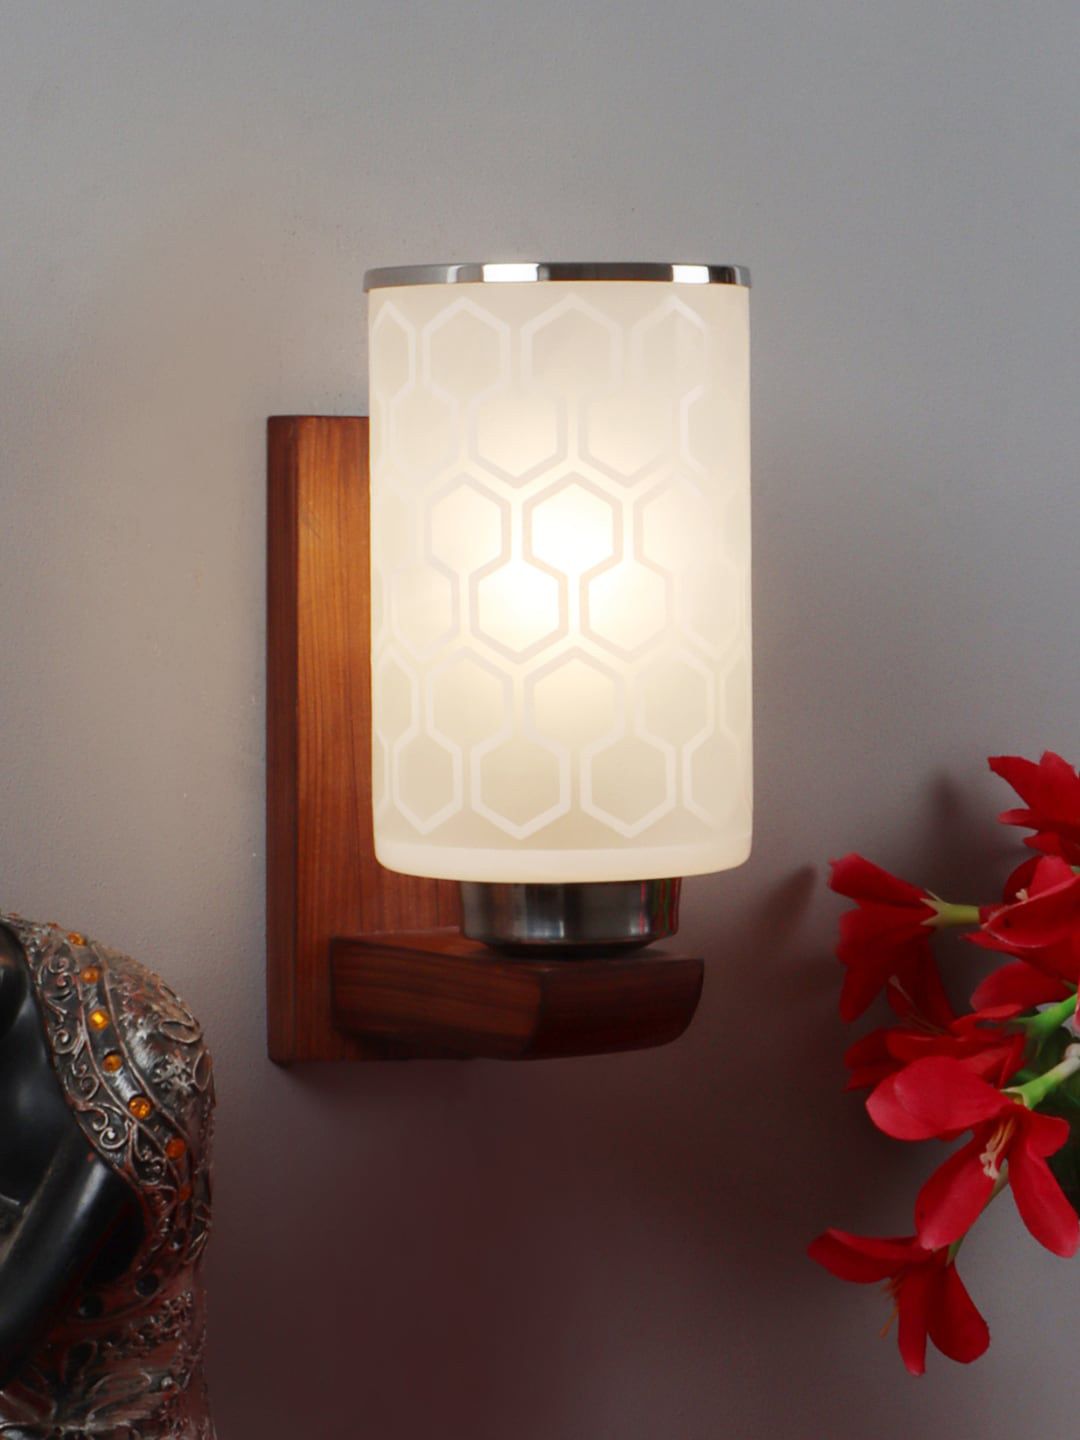 Foziq Brown & White Textured Wall Lamp Price in India